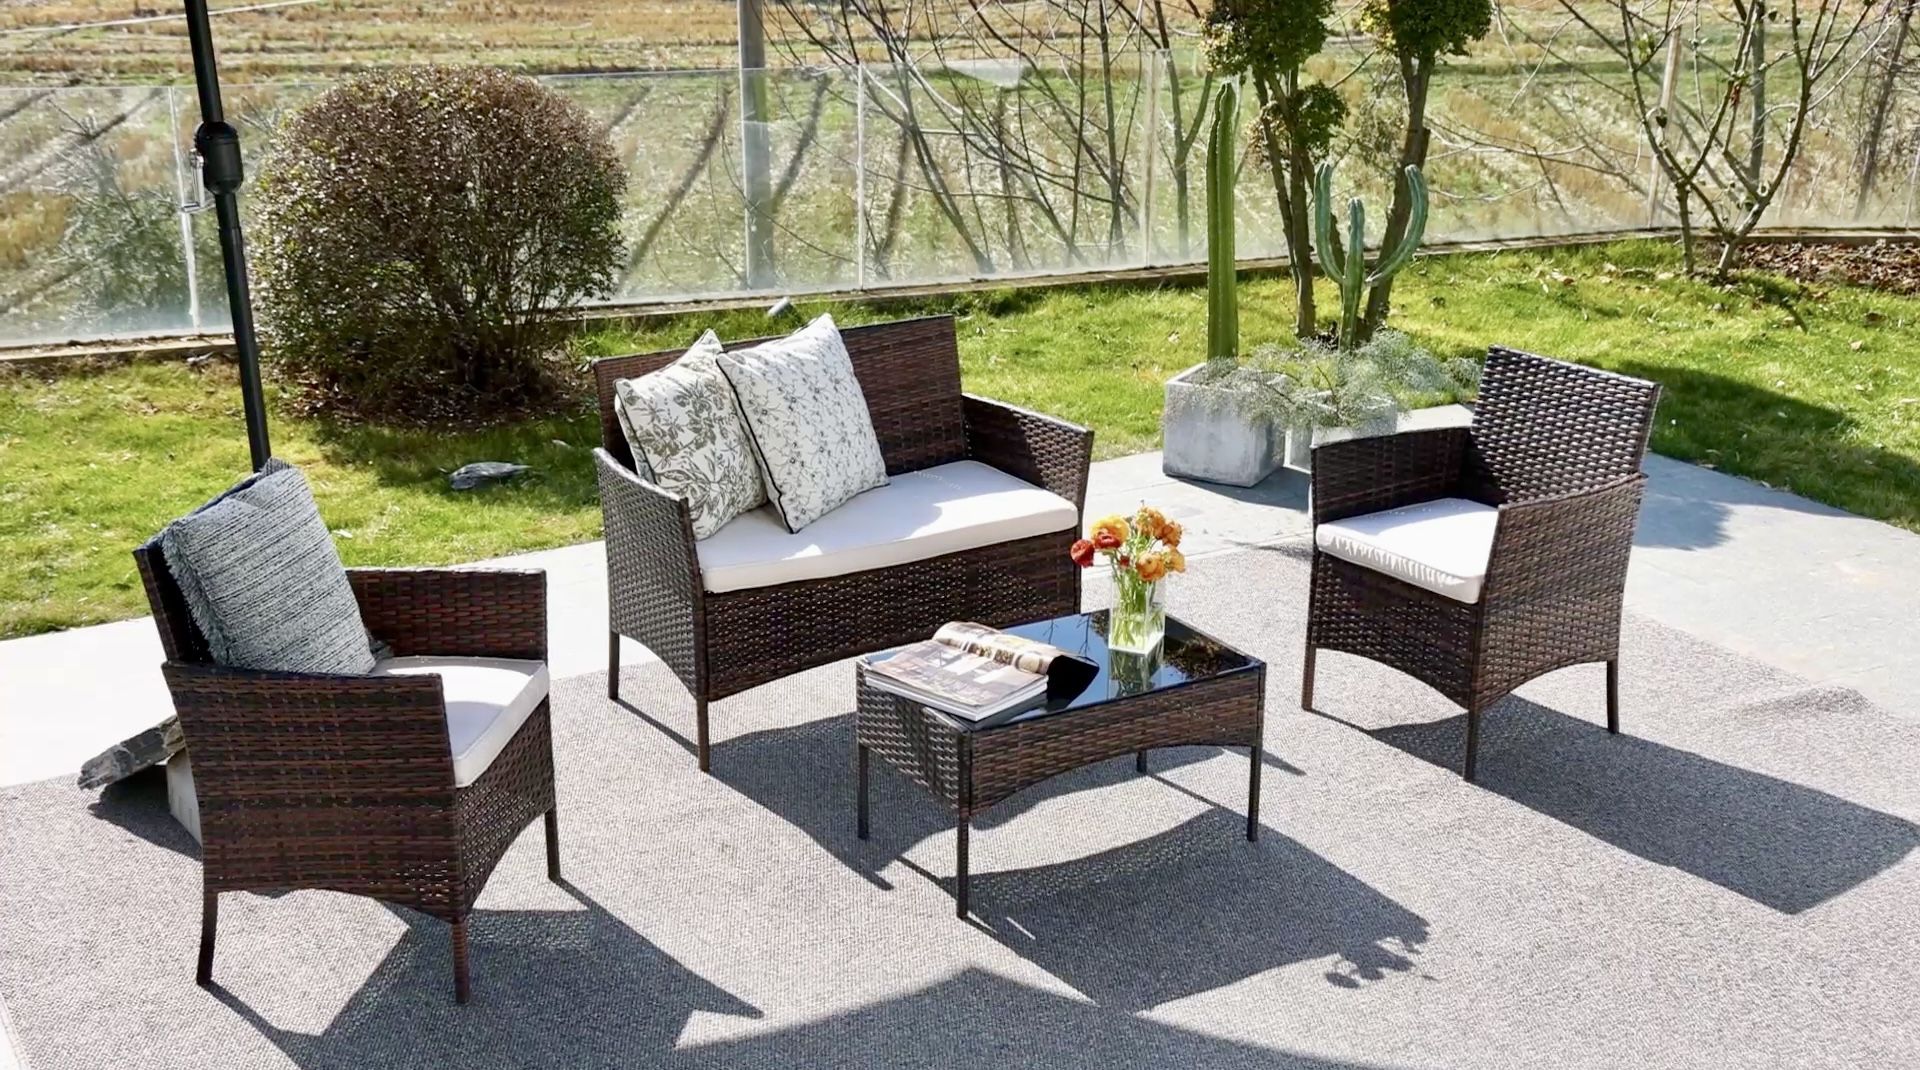 NEW Patio Furniture Set 4 Pieces, Outdoor Furniture W/ Soft Cushion & Glass Table - Loveseat !